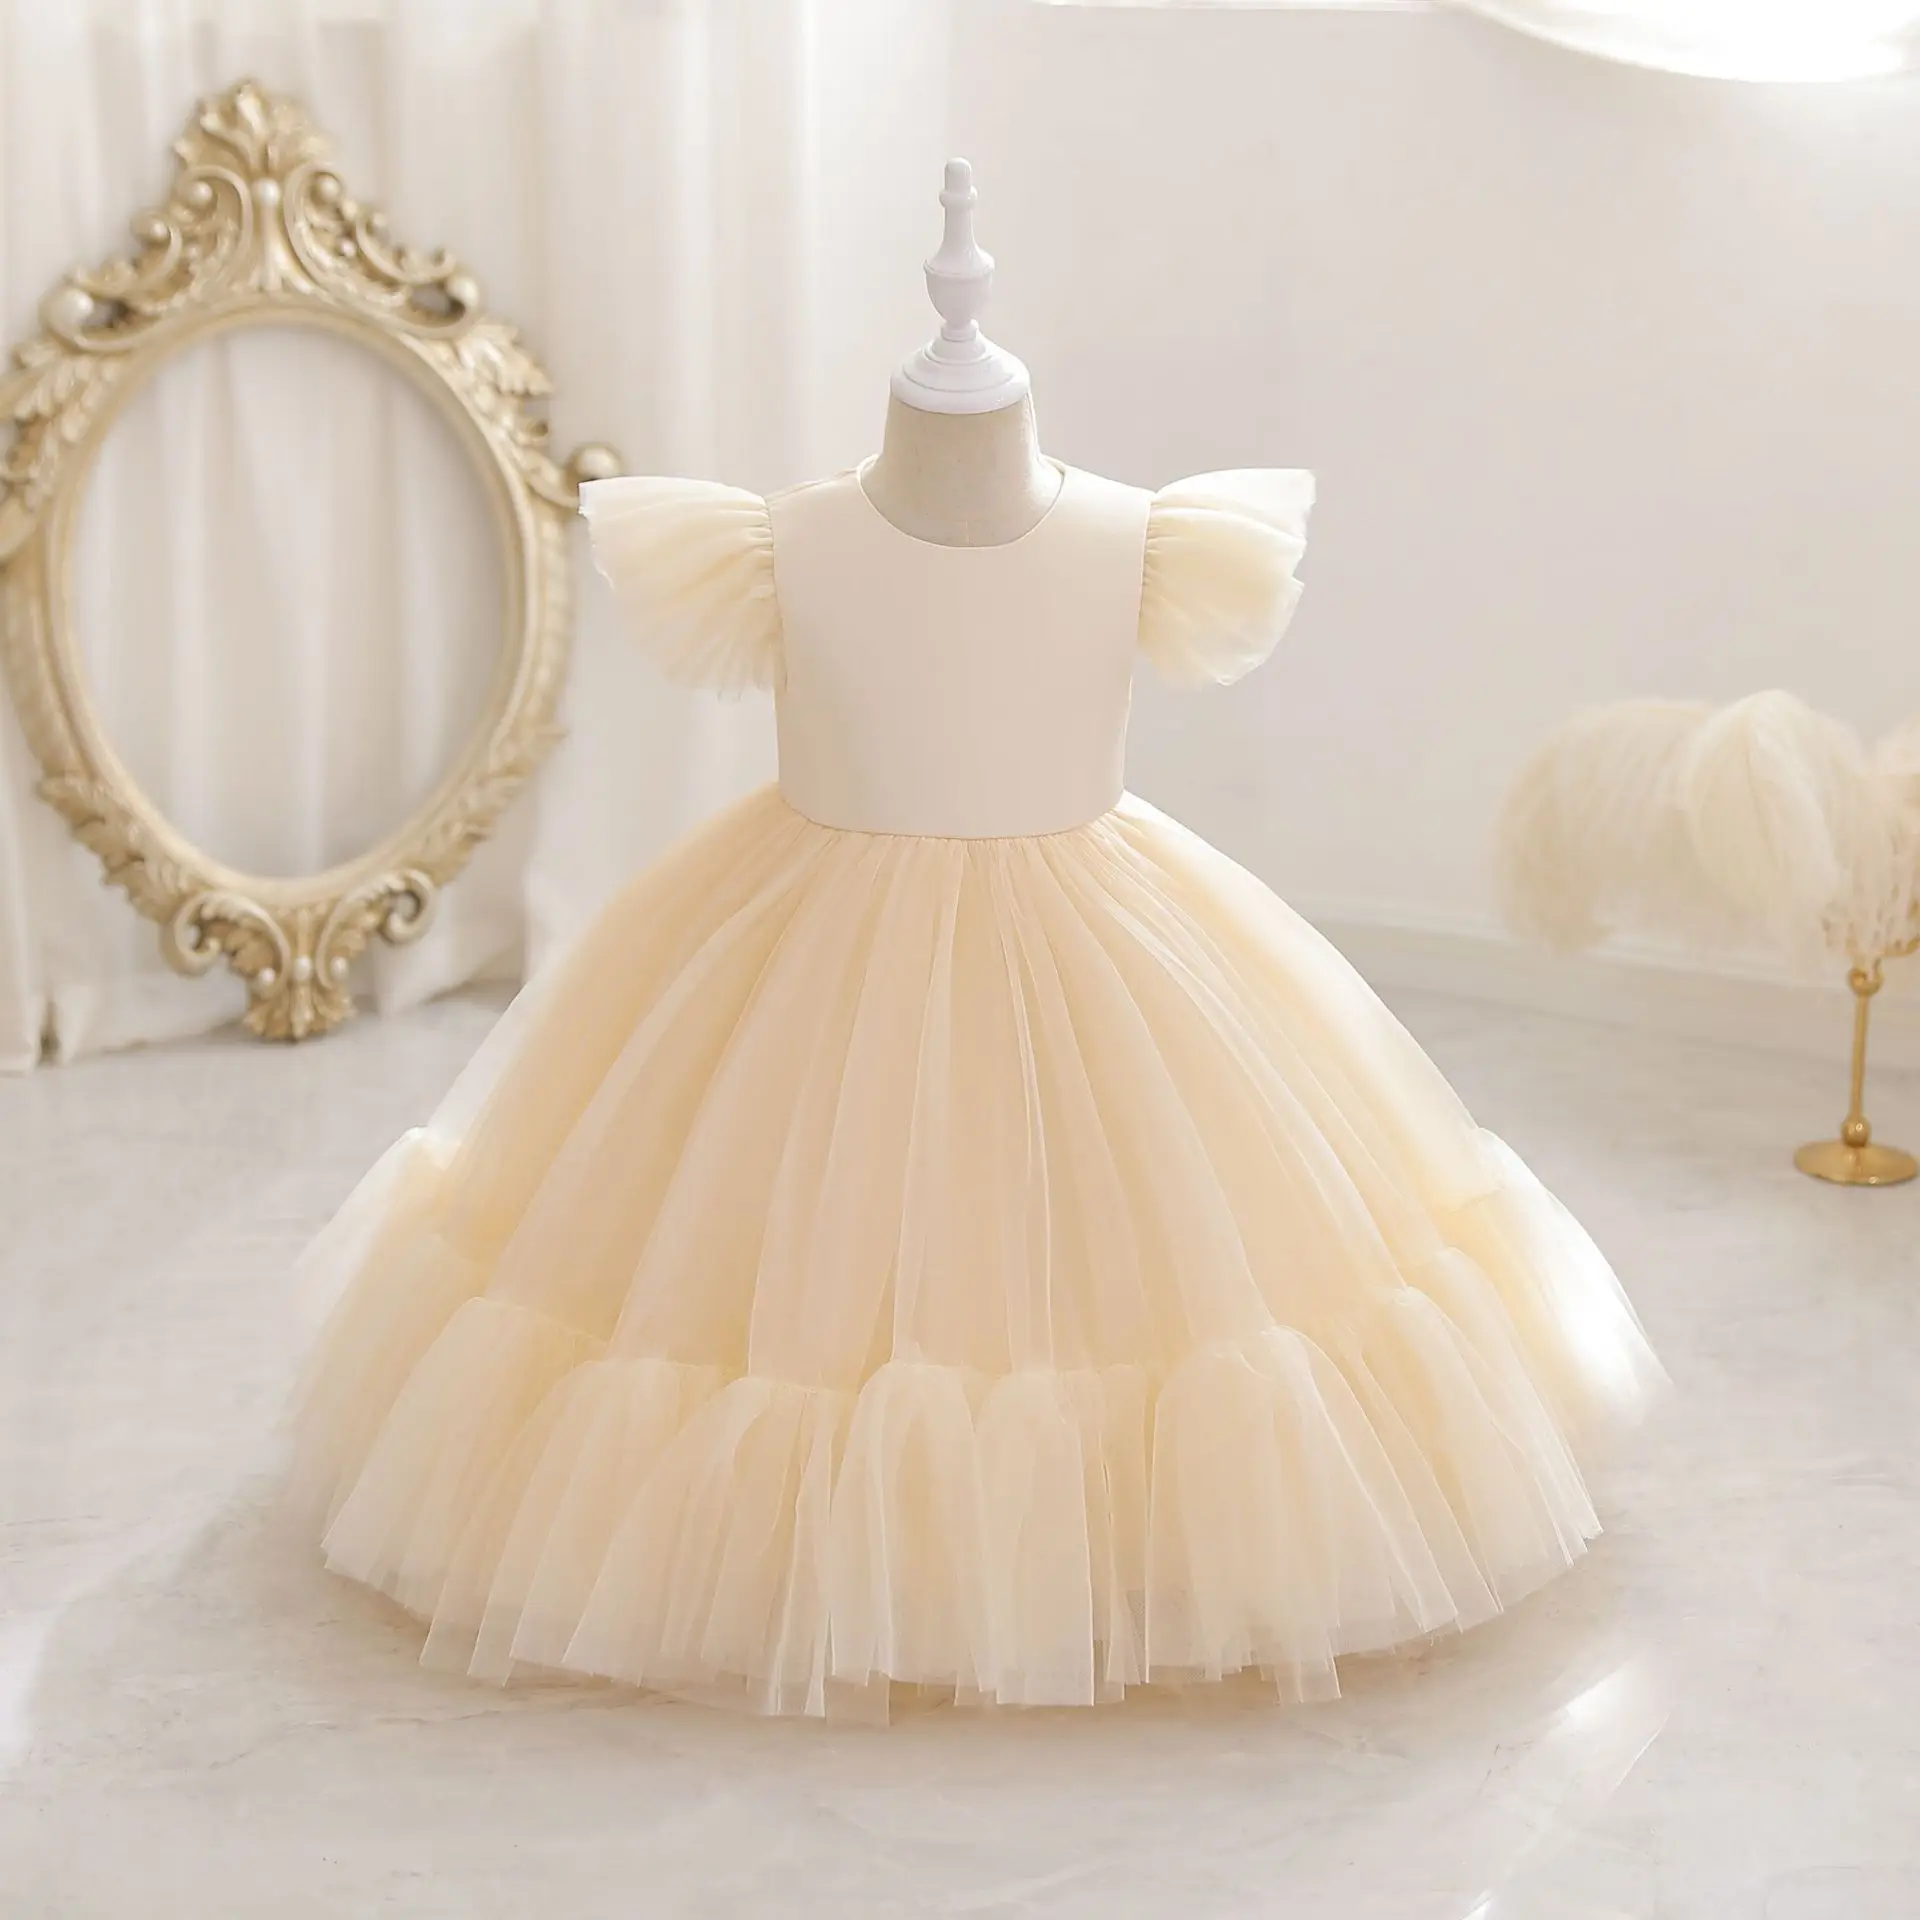 Elegant Girl Fluffy Dress Lace Tulle Princess Wedding Ceremony Costume Birthday Outfits White 1st Communion Gown Kids Gala Cloth